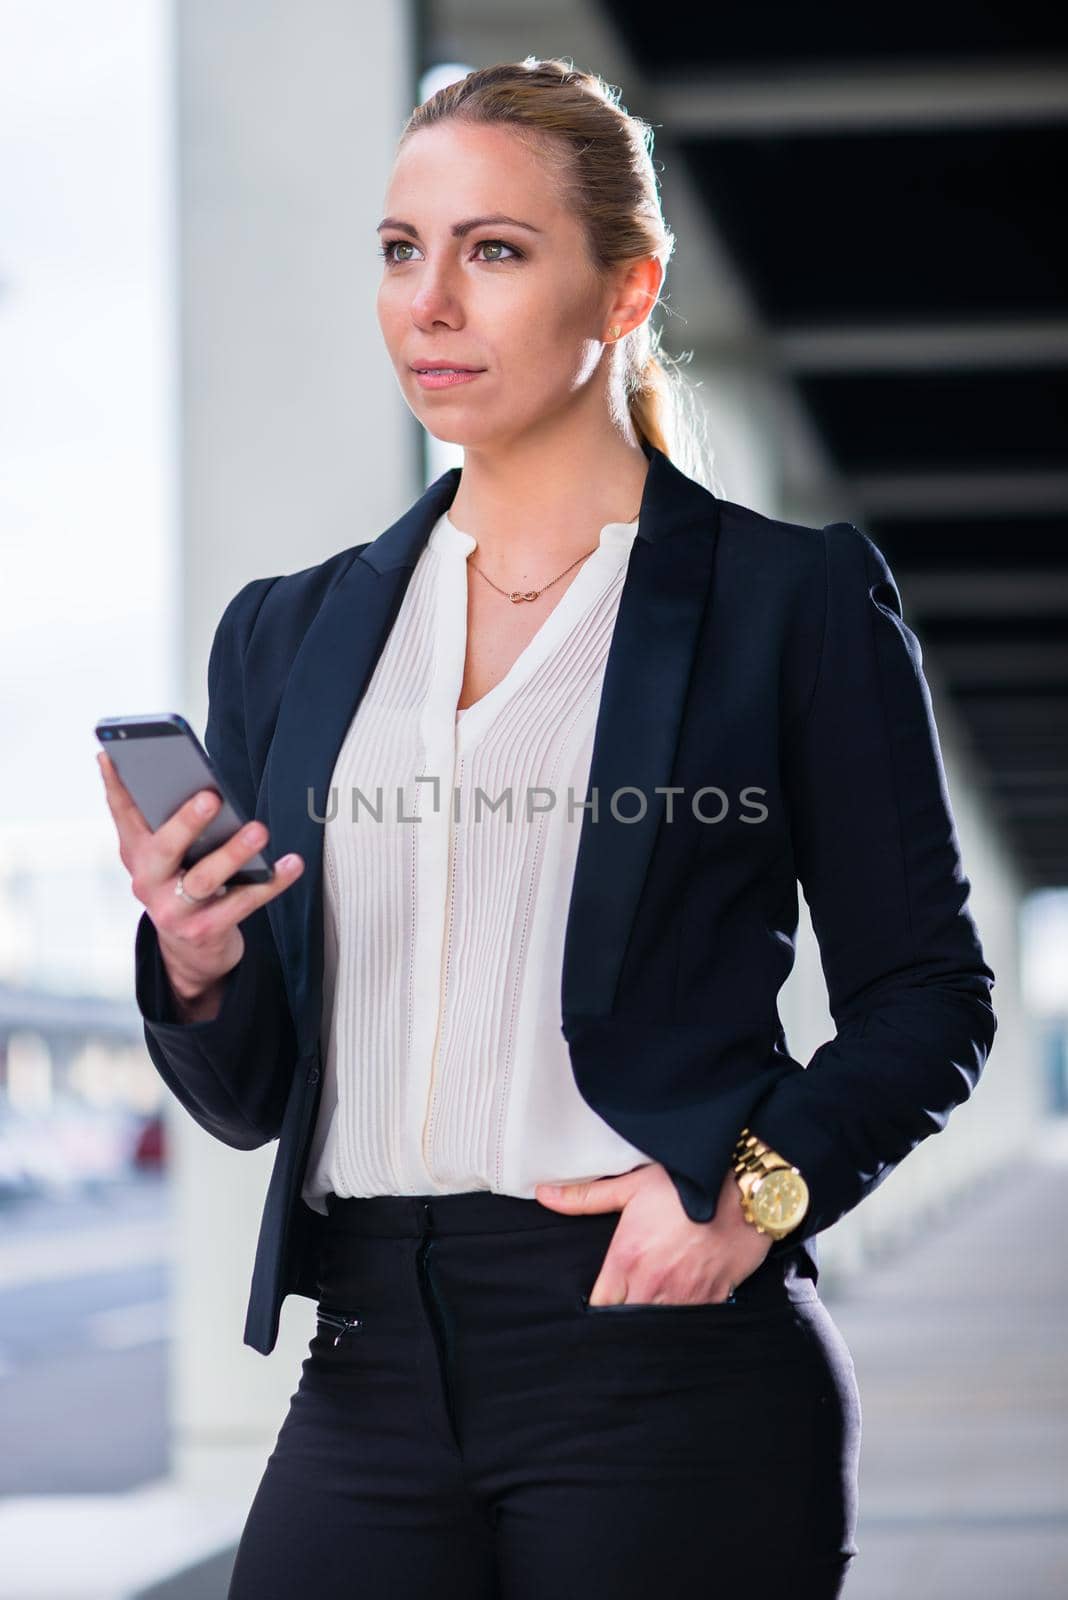 Business woman with phone outdoors standing in front of building